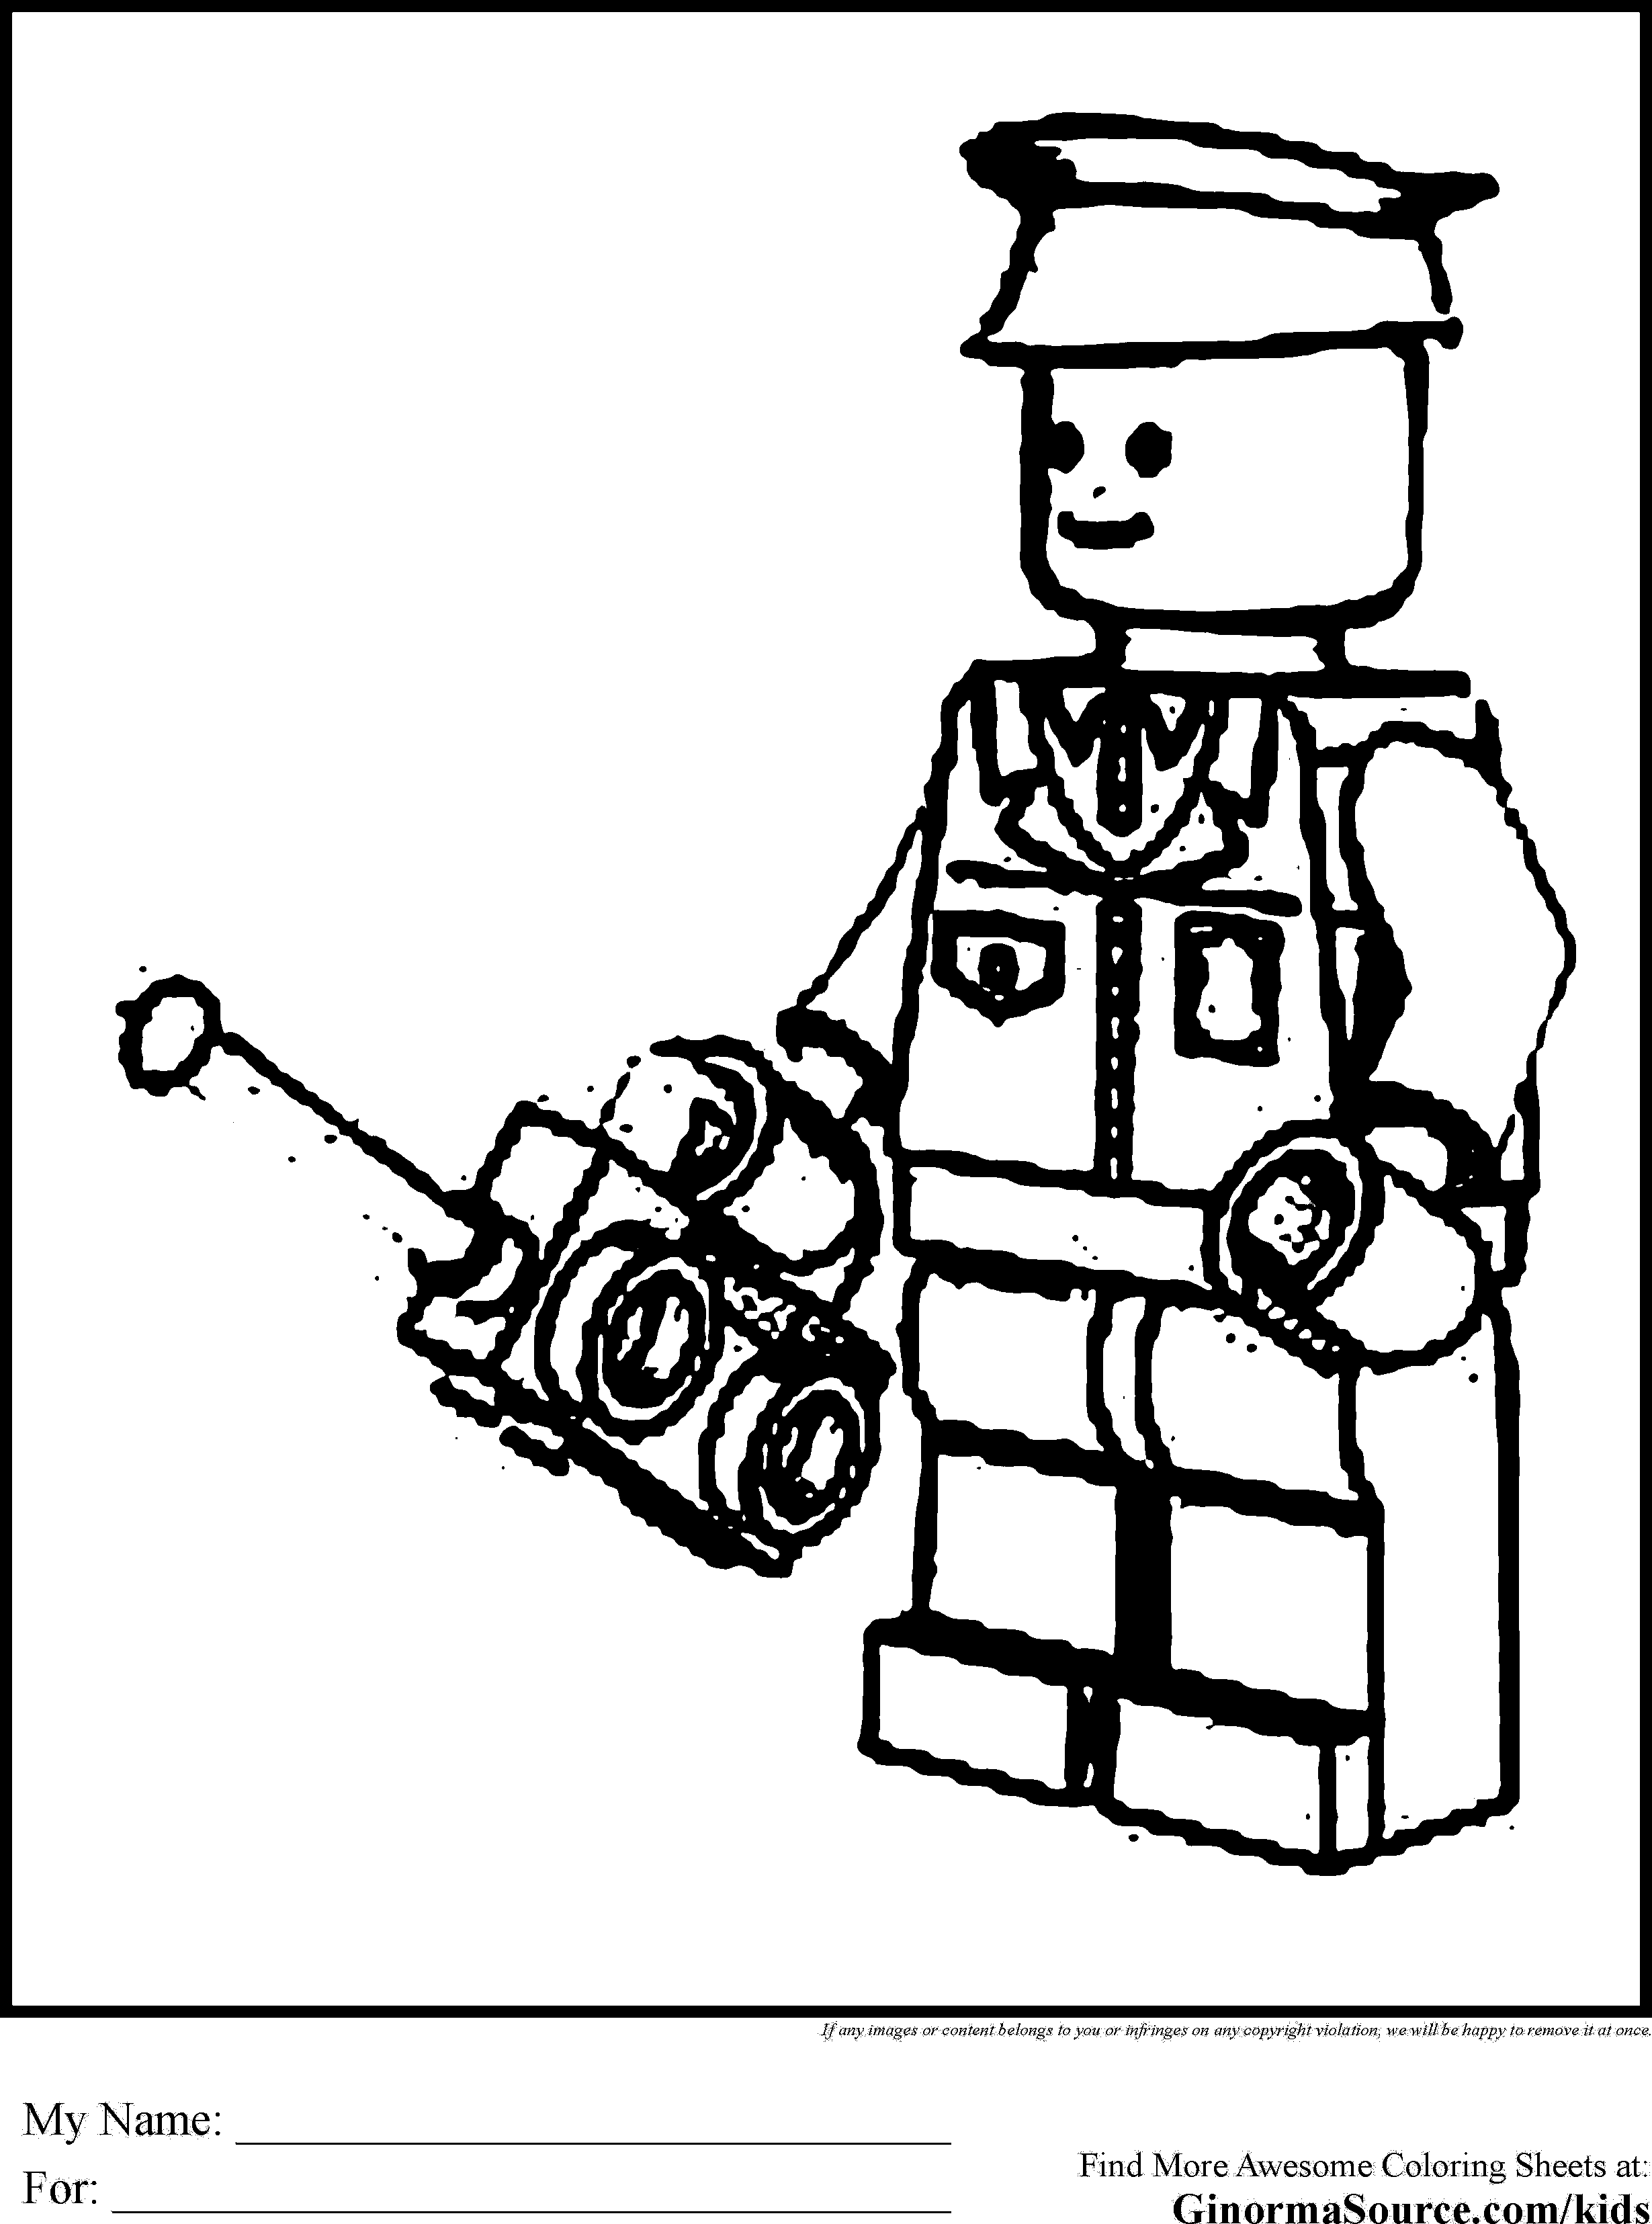 Lego Police Colouring Sheets - High Quality Coloring Pages